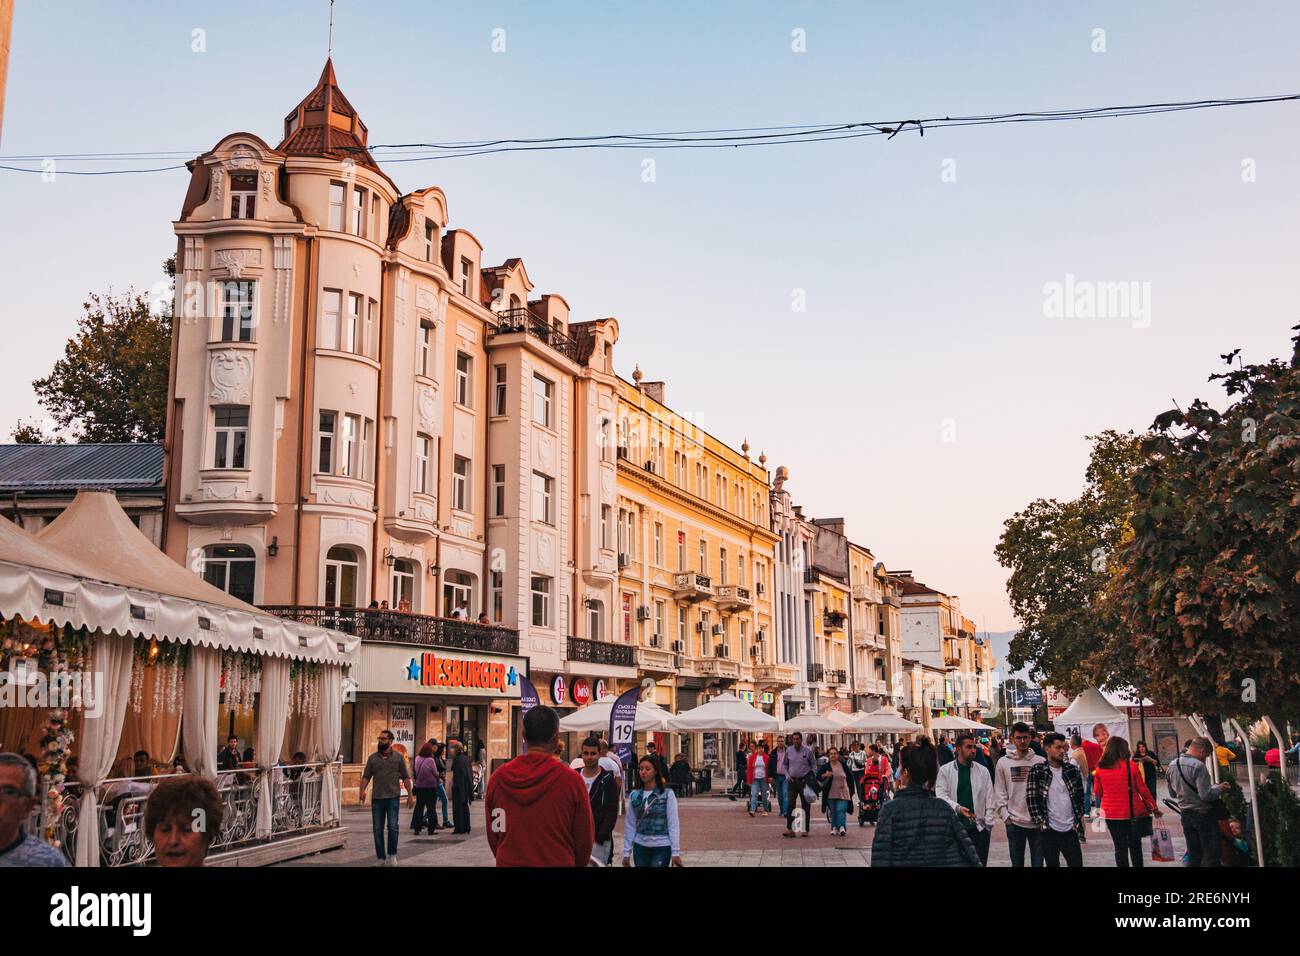 ul. Knyaz Alexander I, the main street in Plovdiv, Bulgaria. Retailers and cafes occupy buildings built in a mix of architectural styles Stock Photo